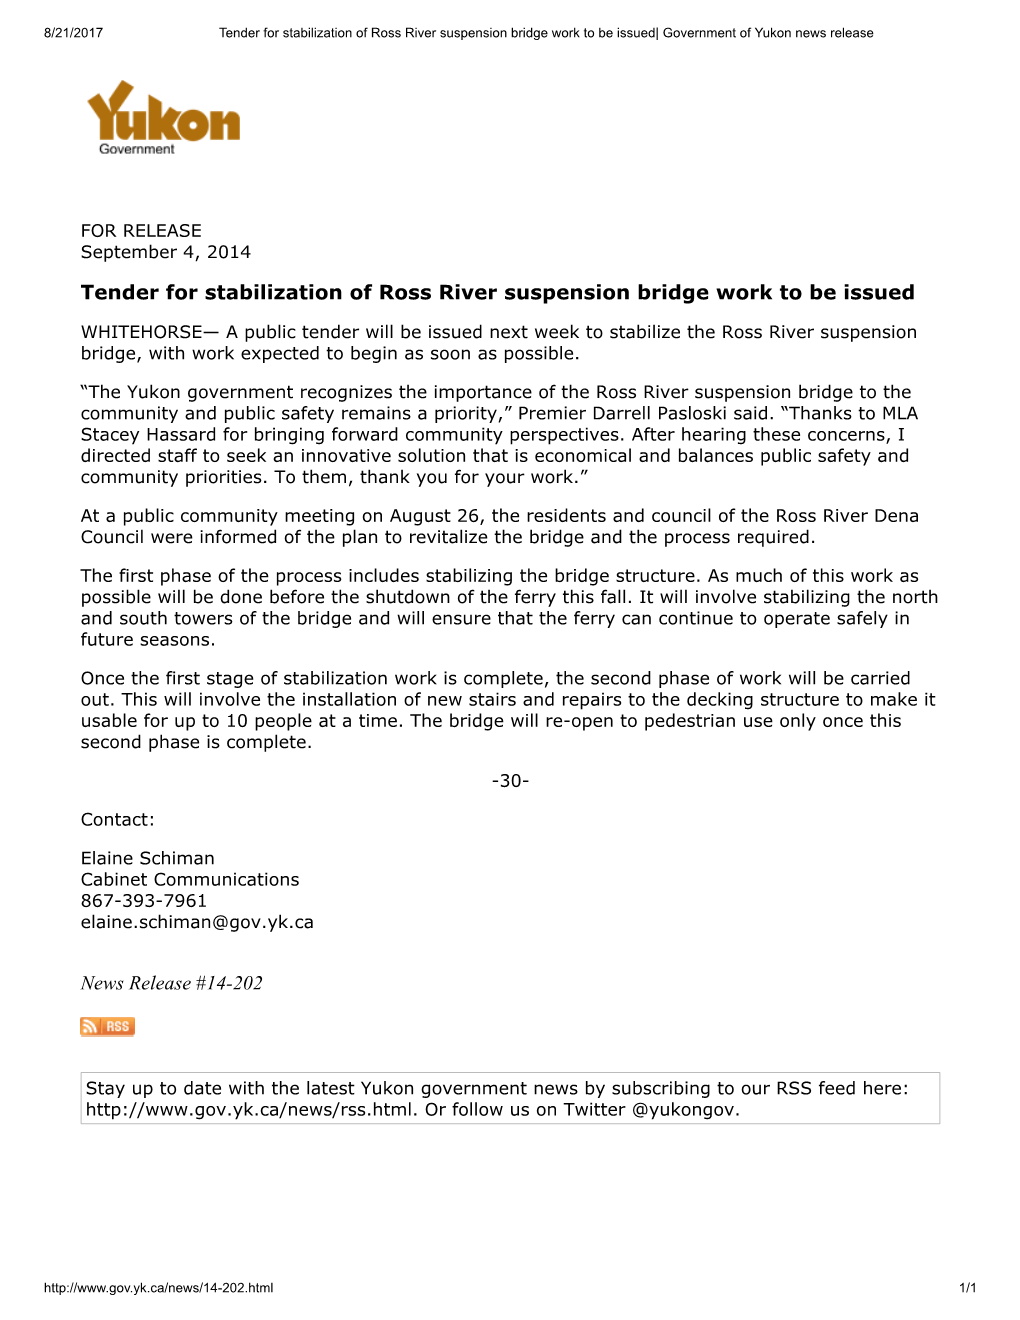 Tender for Stabilization of Ross River Suspension Bridge Work to Be Issued News Release #14-202